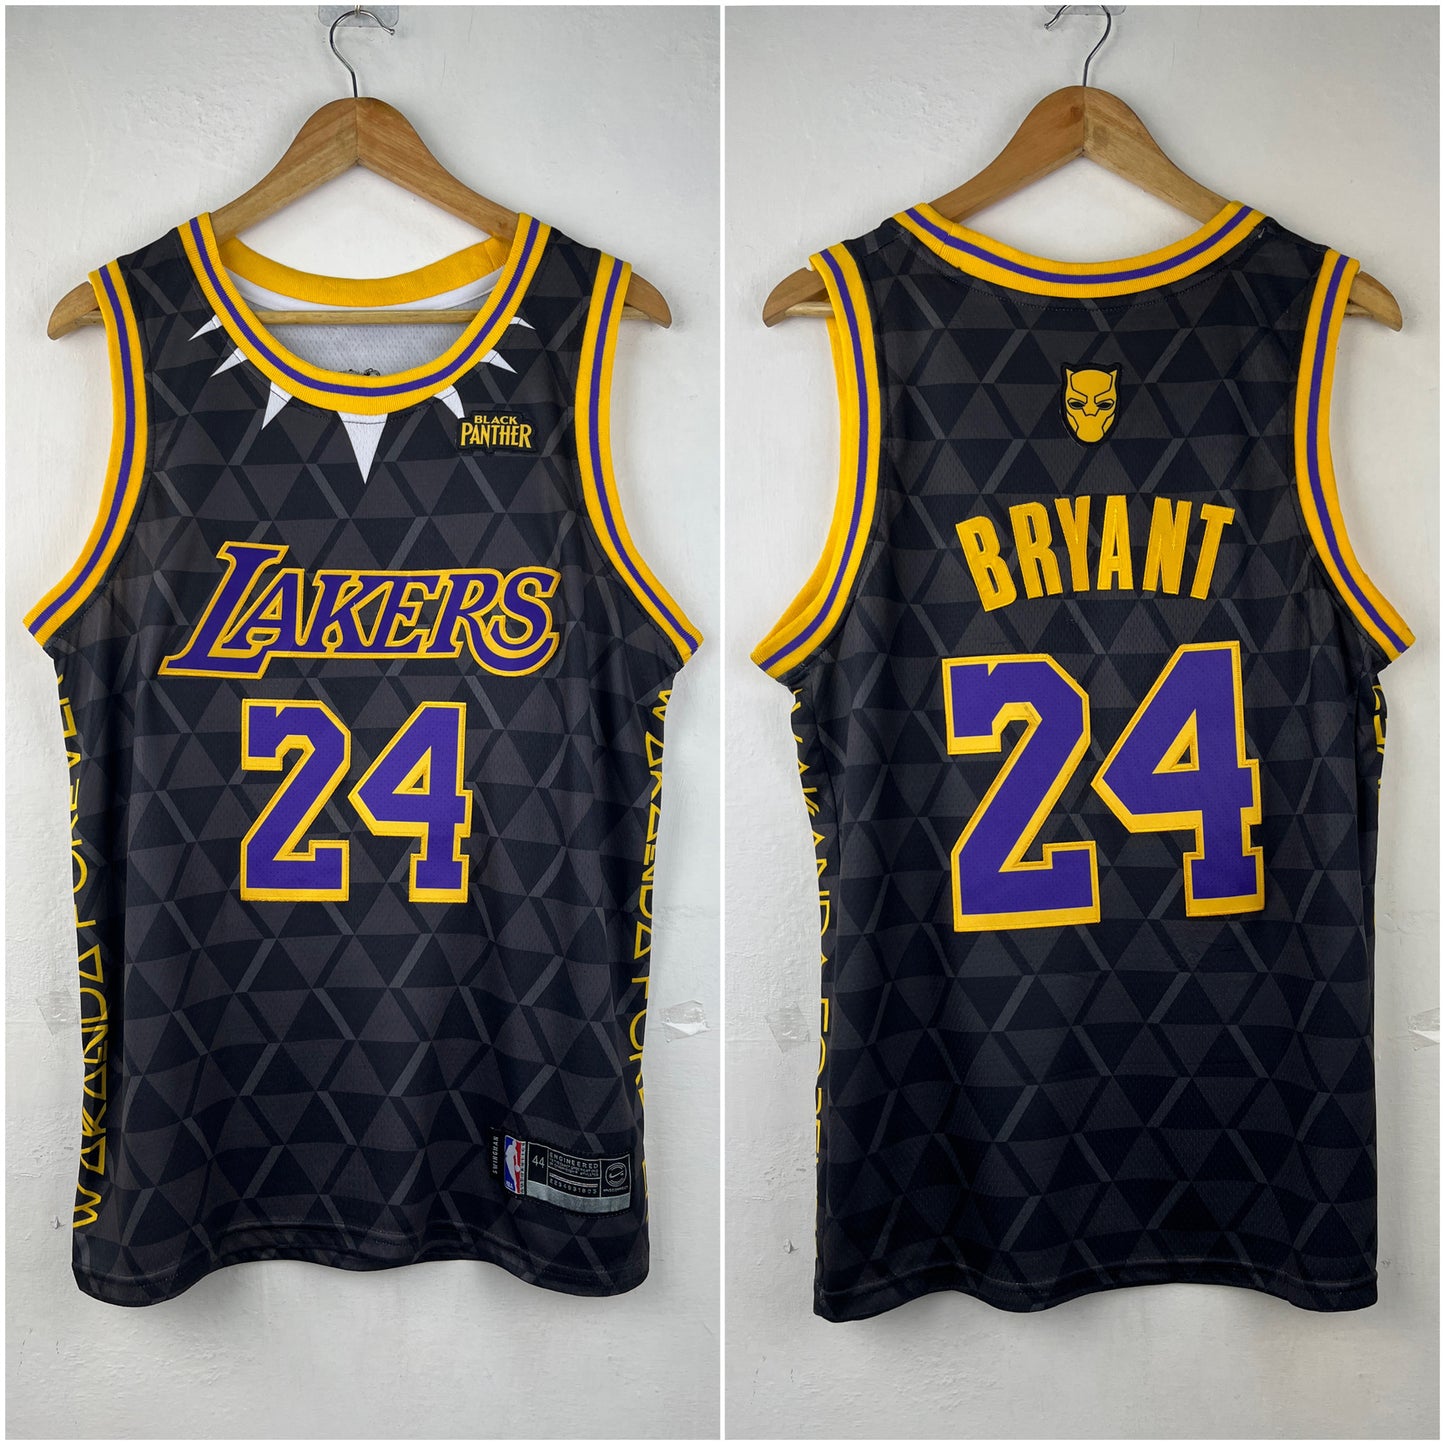 BRYANT X BLACK PANTHER 24 Los Angeles Lakers NBA Jersey